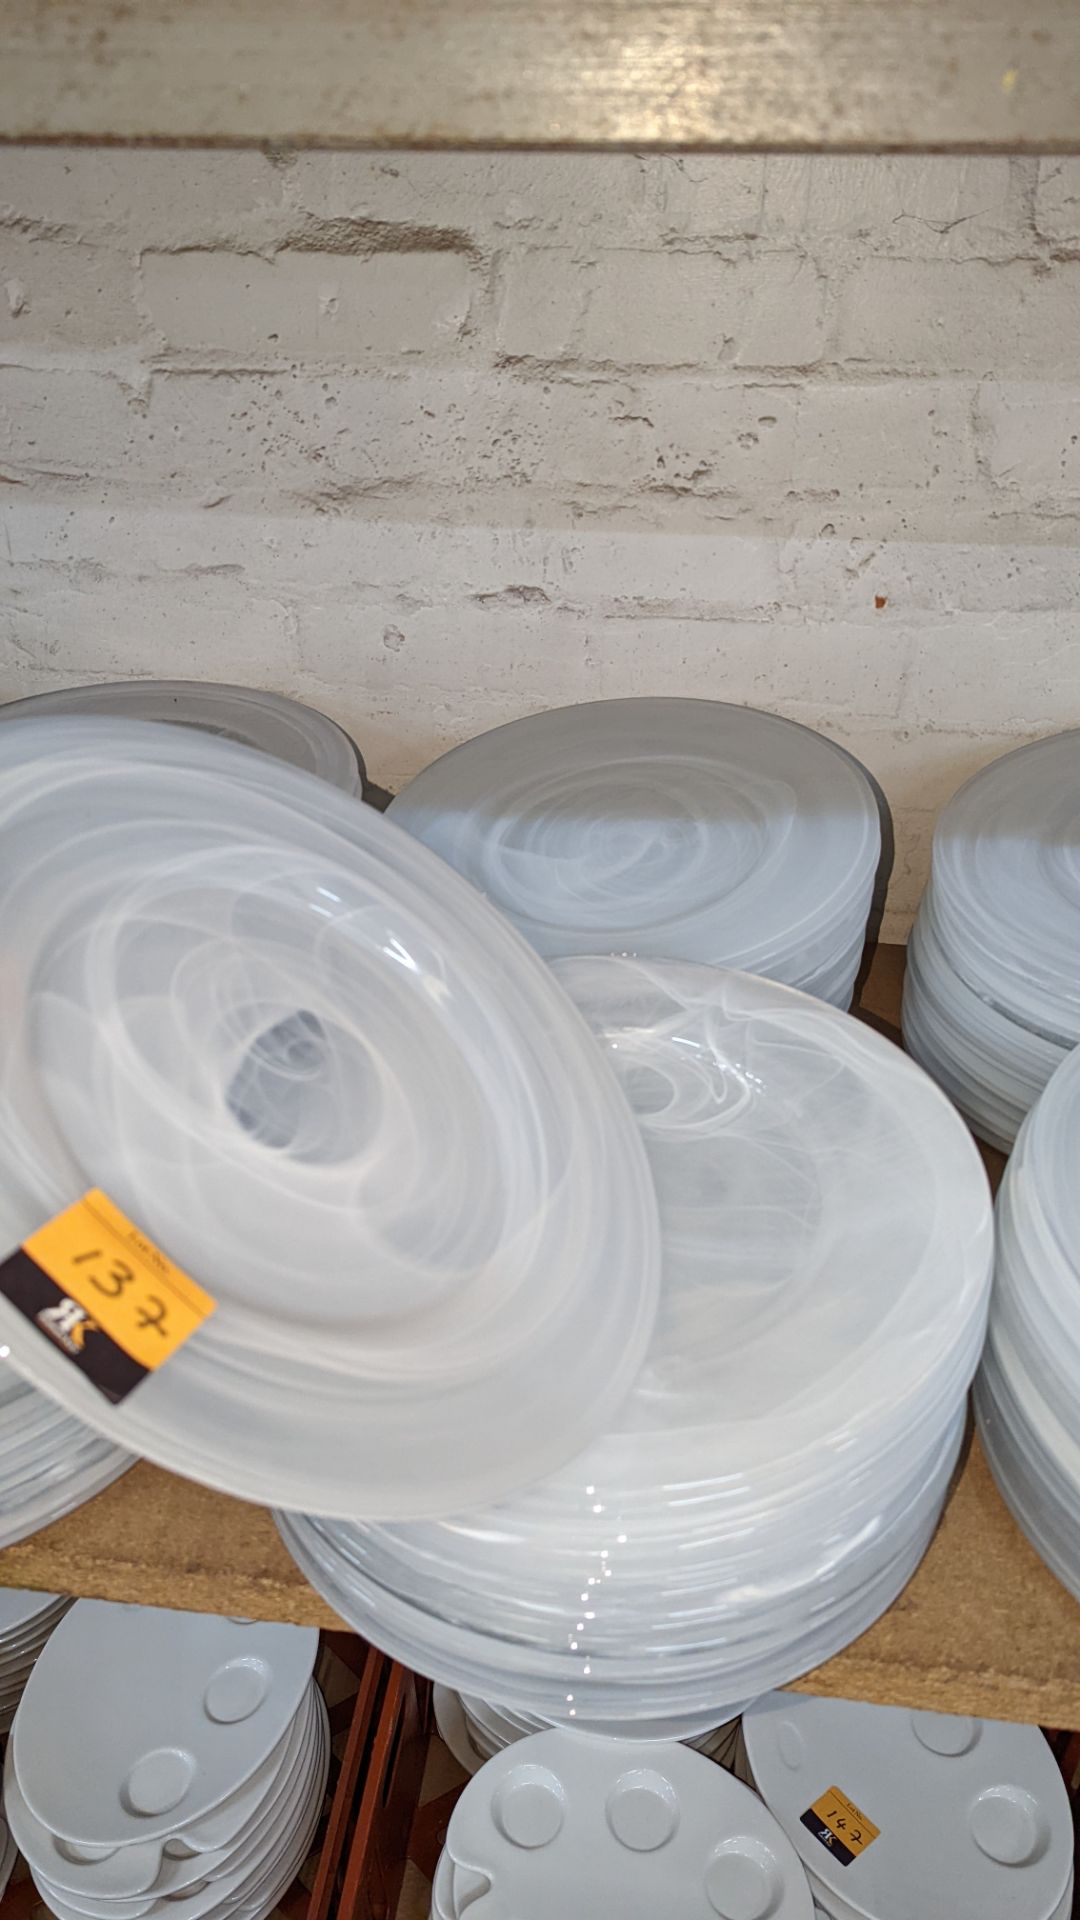 30 off large clear/white patterned glass plates, each measuring approximately 330mm diameter - Image 3 of 3